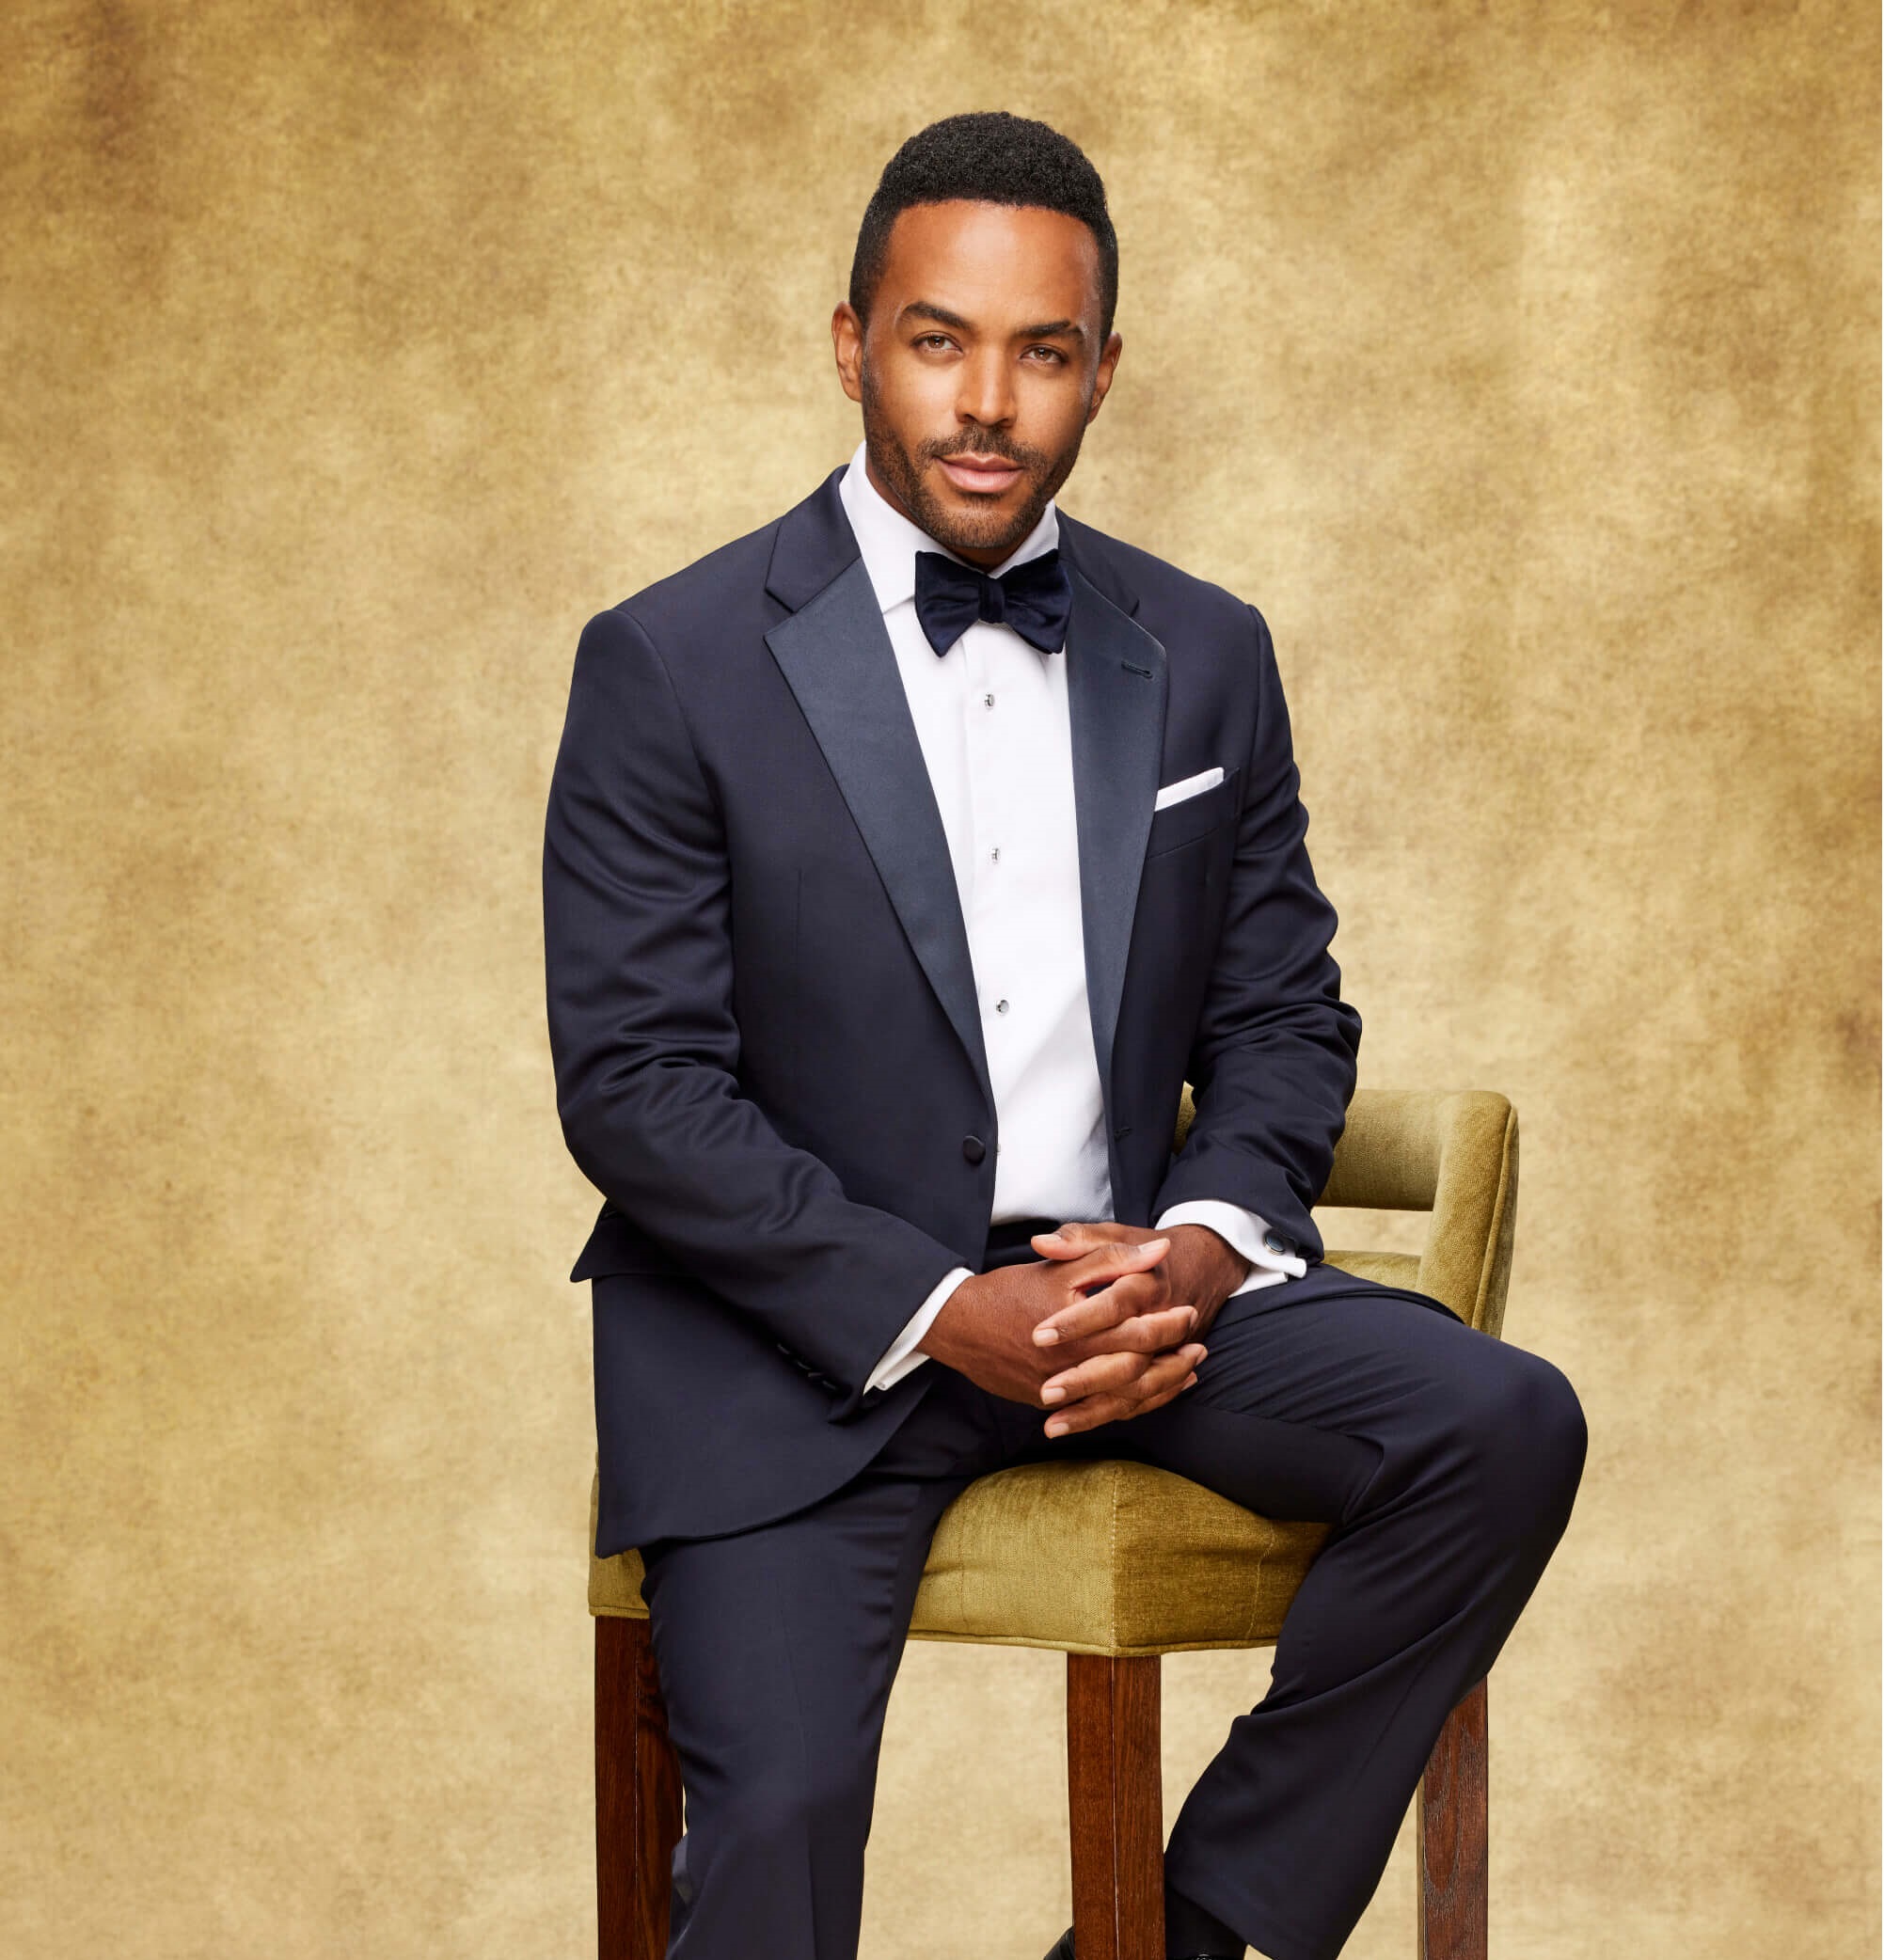 'The Young and the Restless' star Sean Dominic dressed in a blue suit; sits on a stool while posing for a photo.